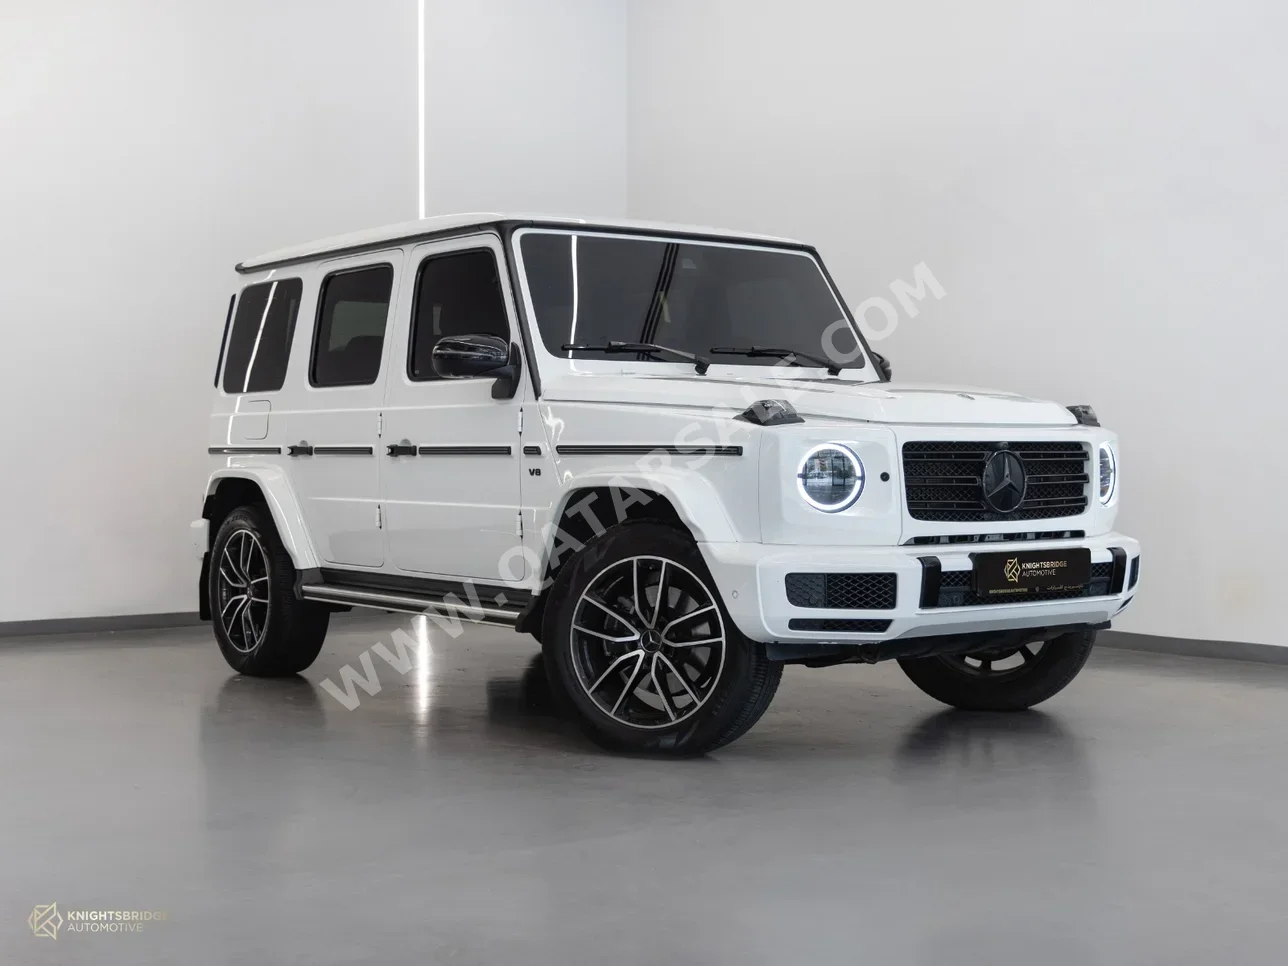 Mercedes-Benz  G-Class  500 AMG  2022  Automatic  22,100 Km  8 Cylinder  Four Wheel Drive (4WD)  SUV  White  With Warranty